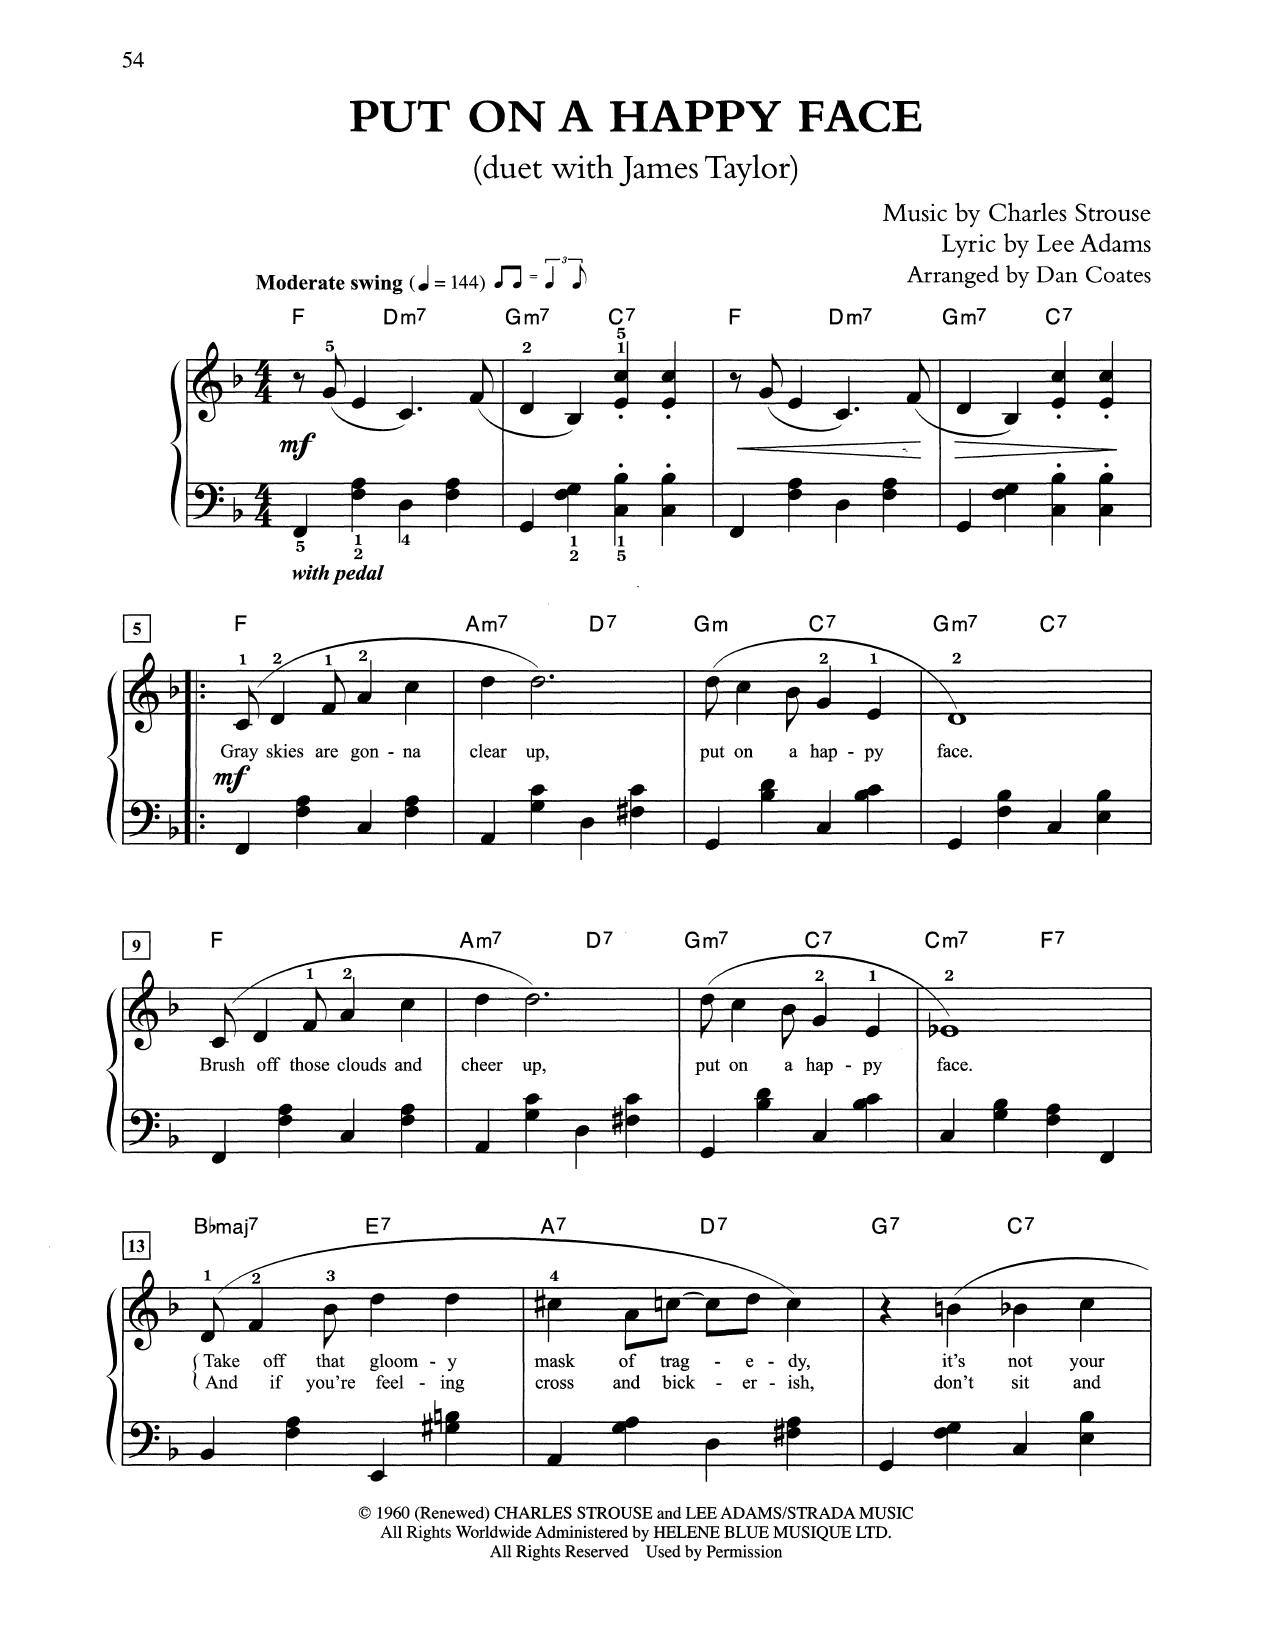 Tony Bennett & James Taylor Put On A Happy Face (arr. Dan Coates) sheet music preview music notes and score for Easy Piano including 3 page(s)